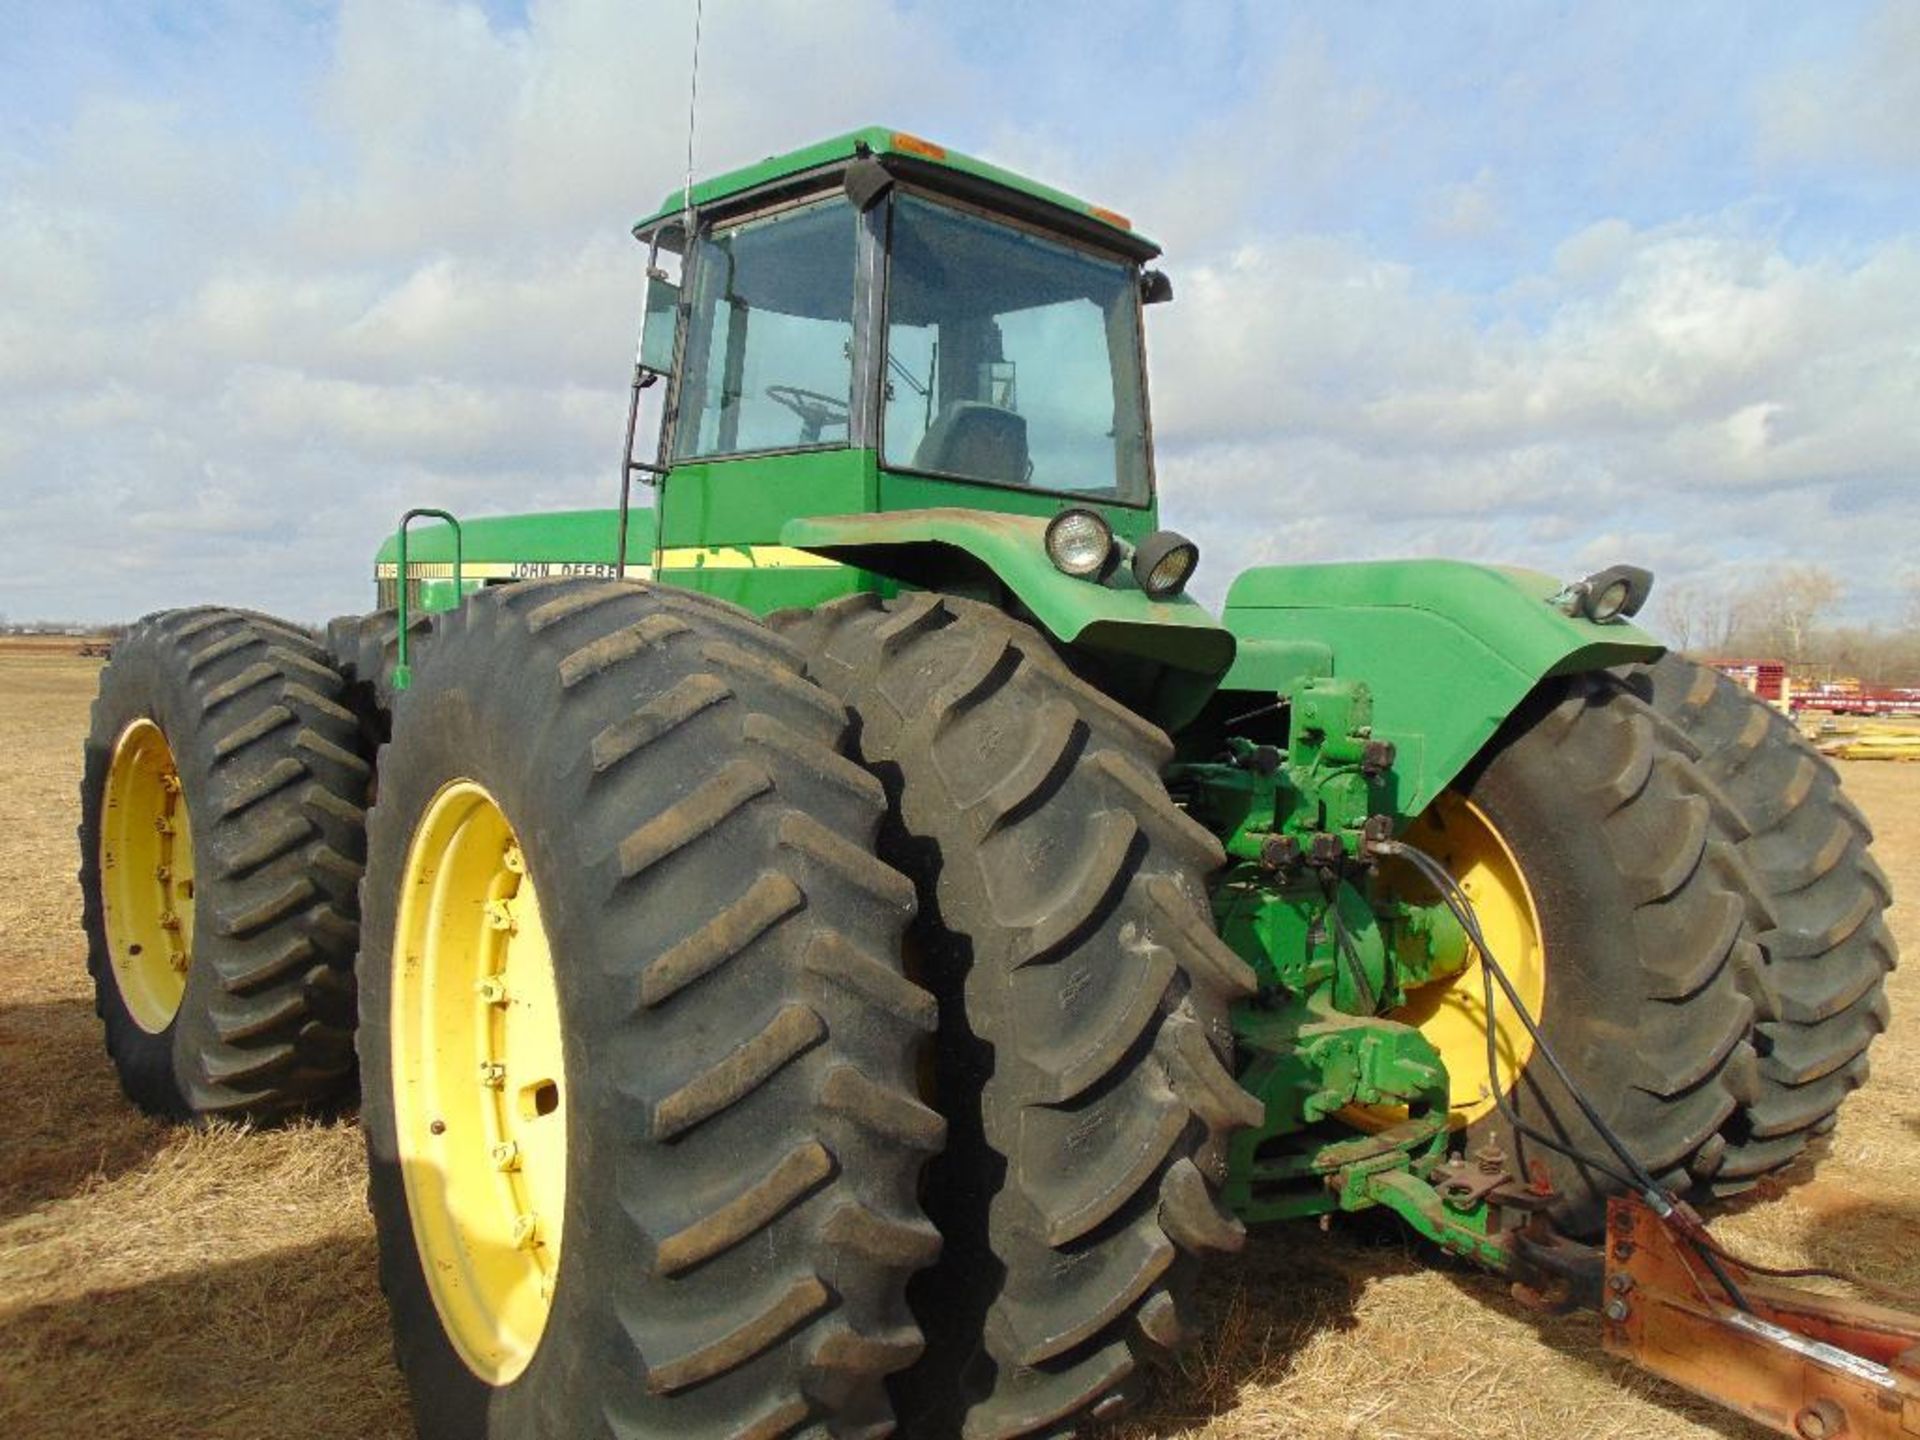 John Deere 8850 4x4 Farm Tractor, s/n h004199, cab, a/c, 4 hyd , duals, hour meter reads 04937 hrs, - Image 9 of 10